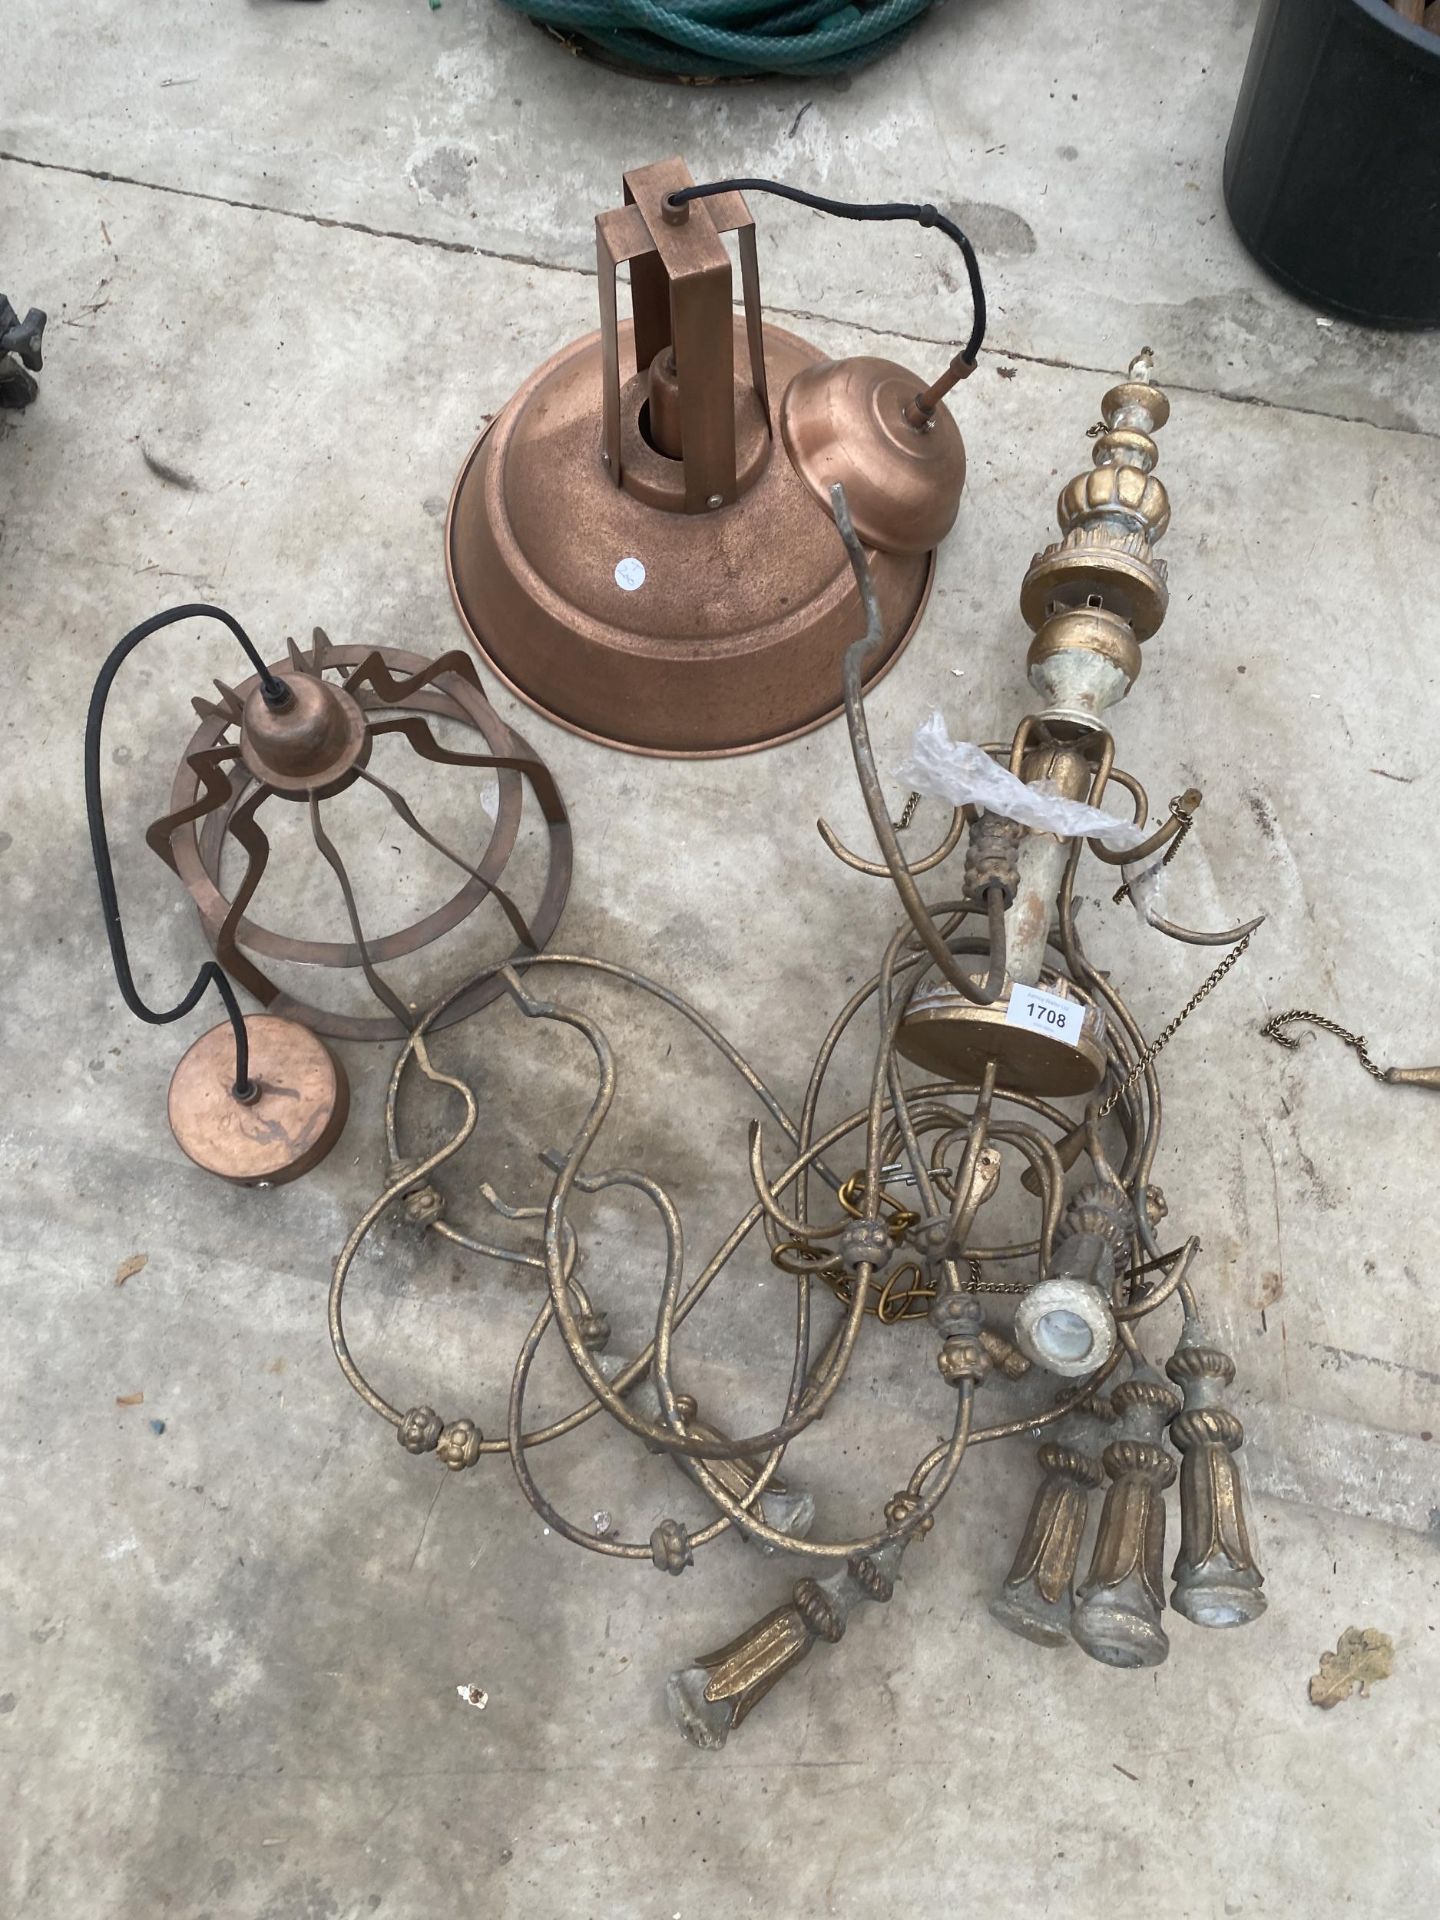 A LARGE VINTAGE LIGHT FITTINGS AND TWO VINTAGE STYLE LIGHT FITTINGS ETC